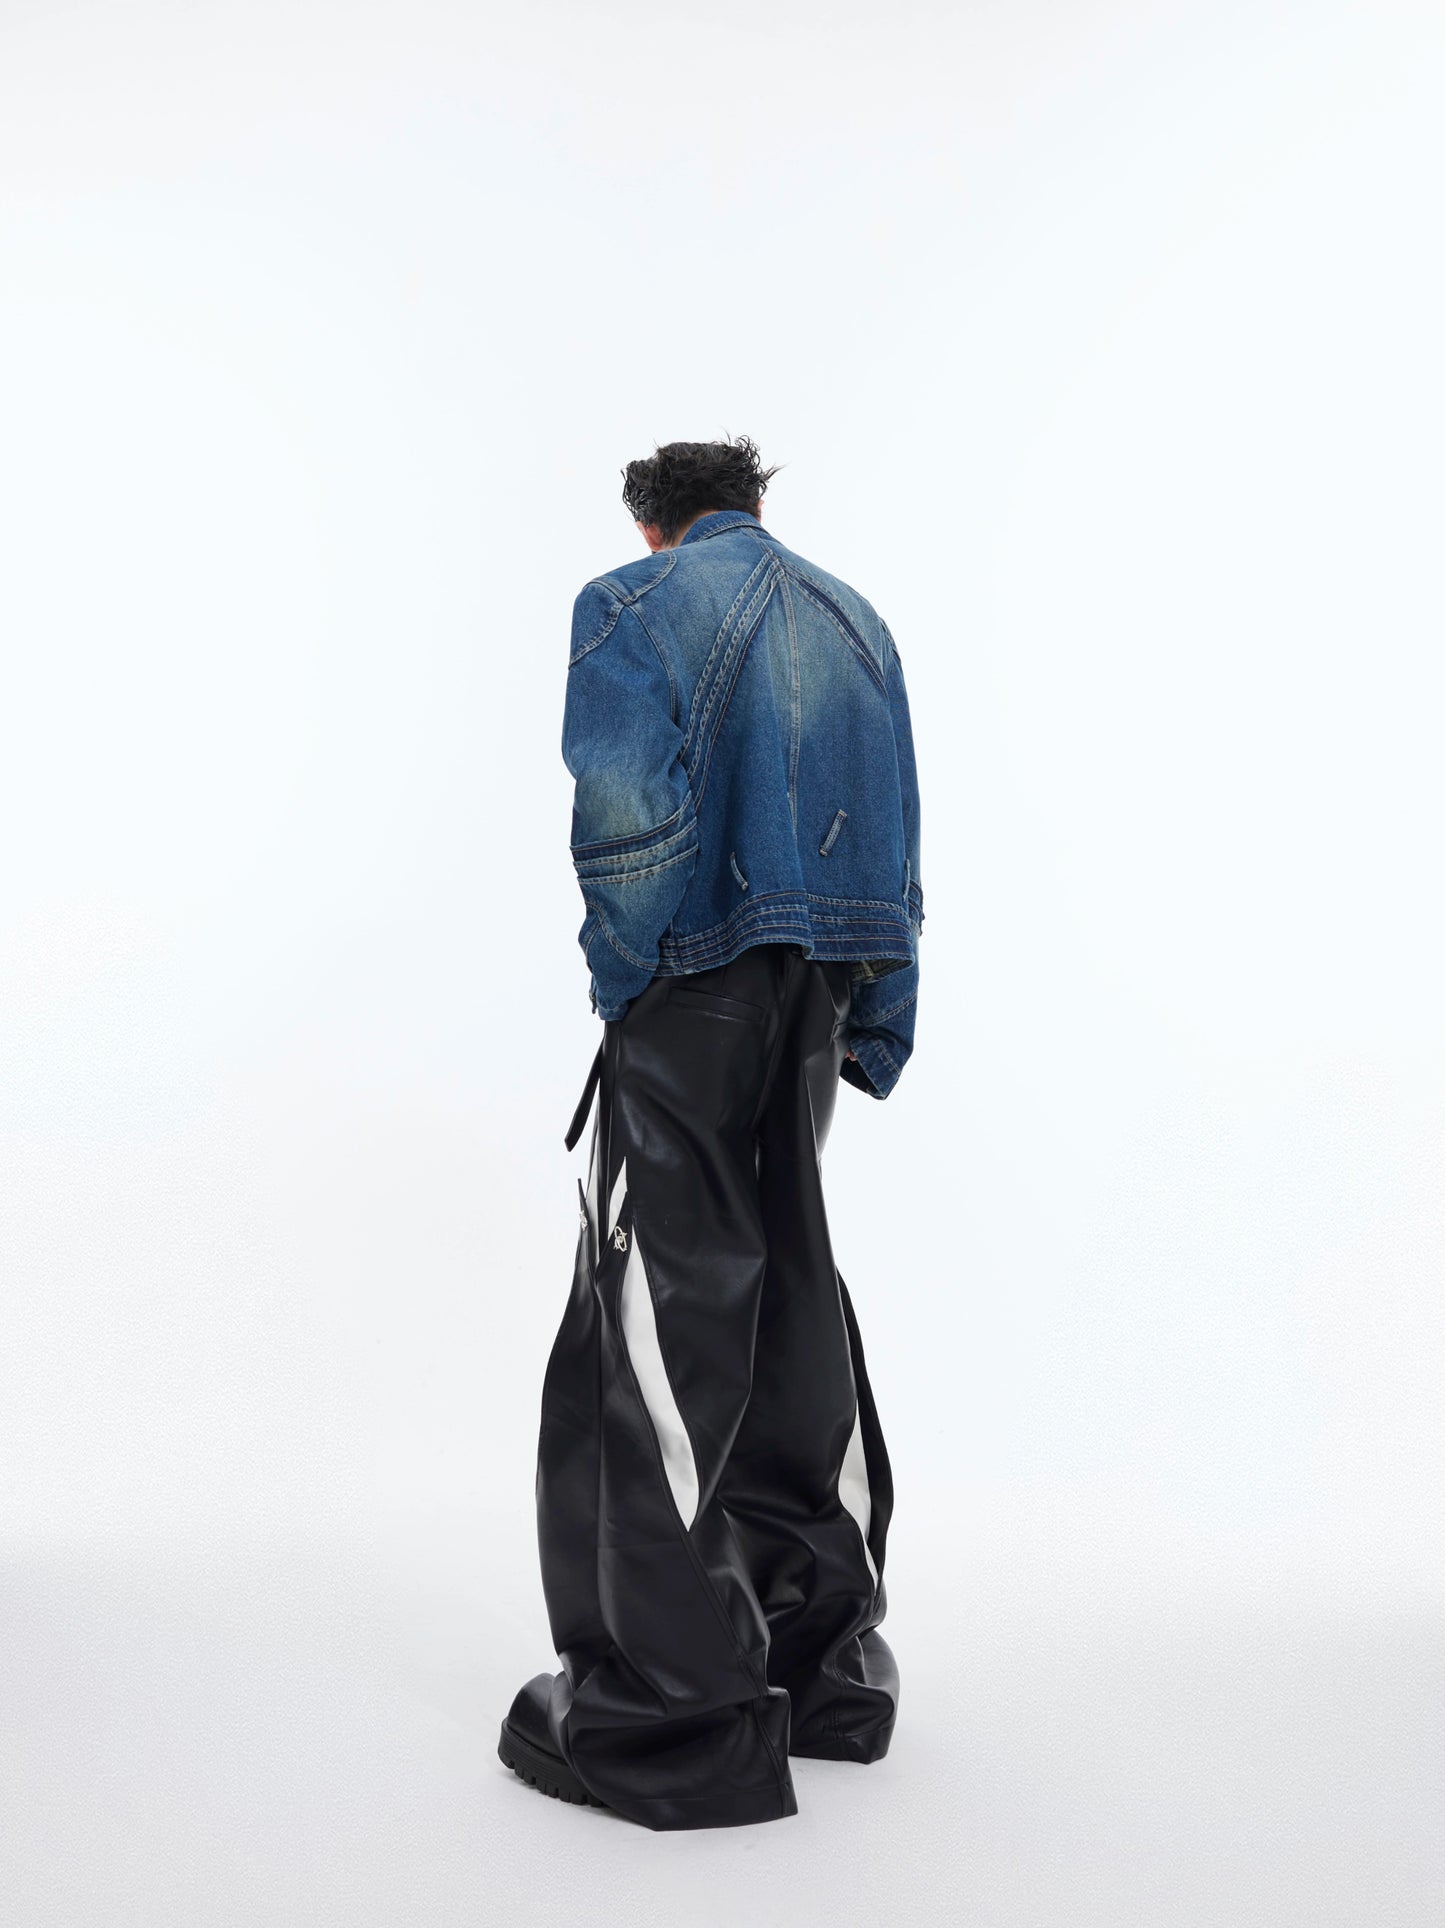 CulturE is a heavyweight niche deconstructed washed vintage denim jacket with a three-dimensional split silhouette jacket for men